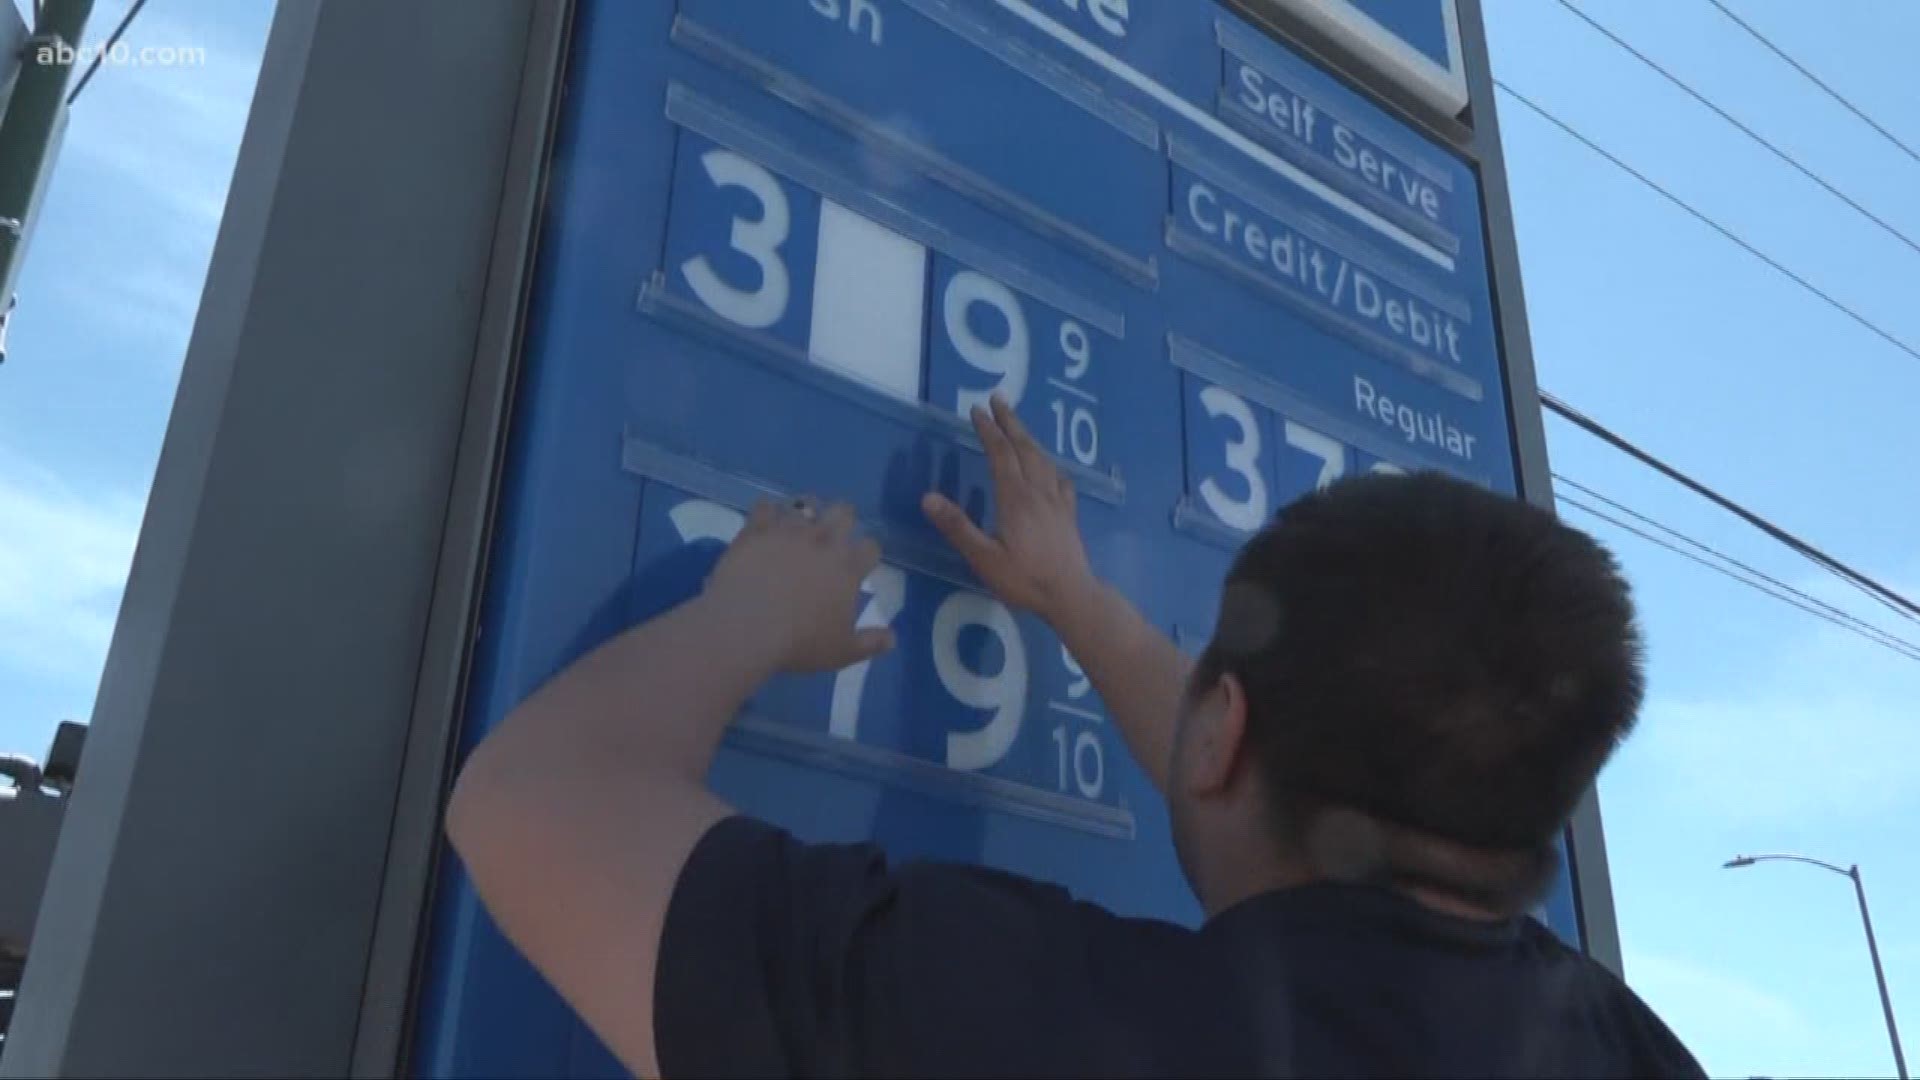 California drivers are not the only ones impacted by the new gas tax. Small business owners, too, say they expect to notice a difference. One local gas station owner told ABC10 why paying more at the pump won’t help his bottom line.